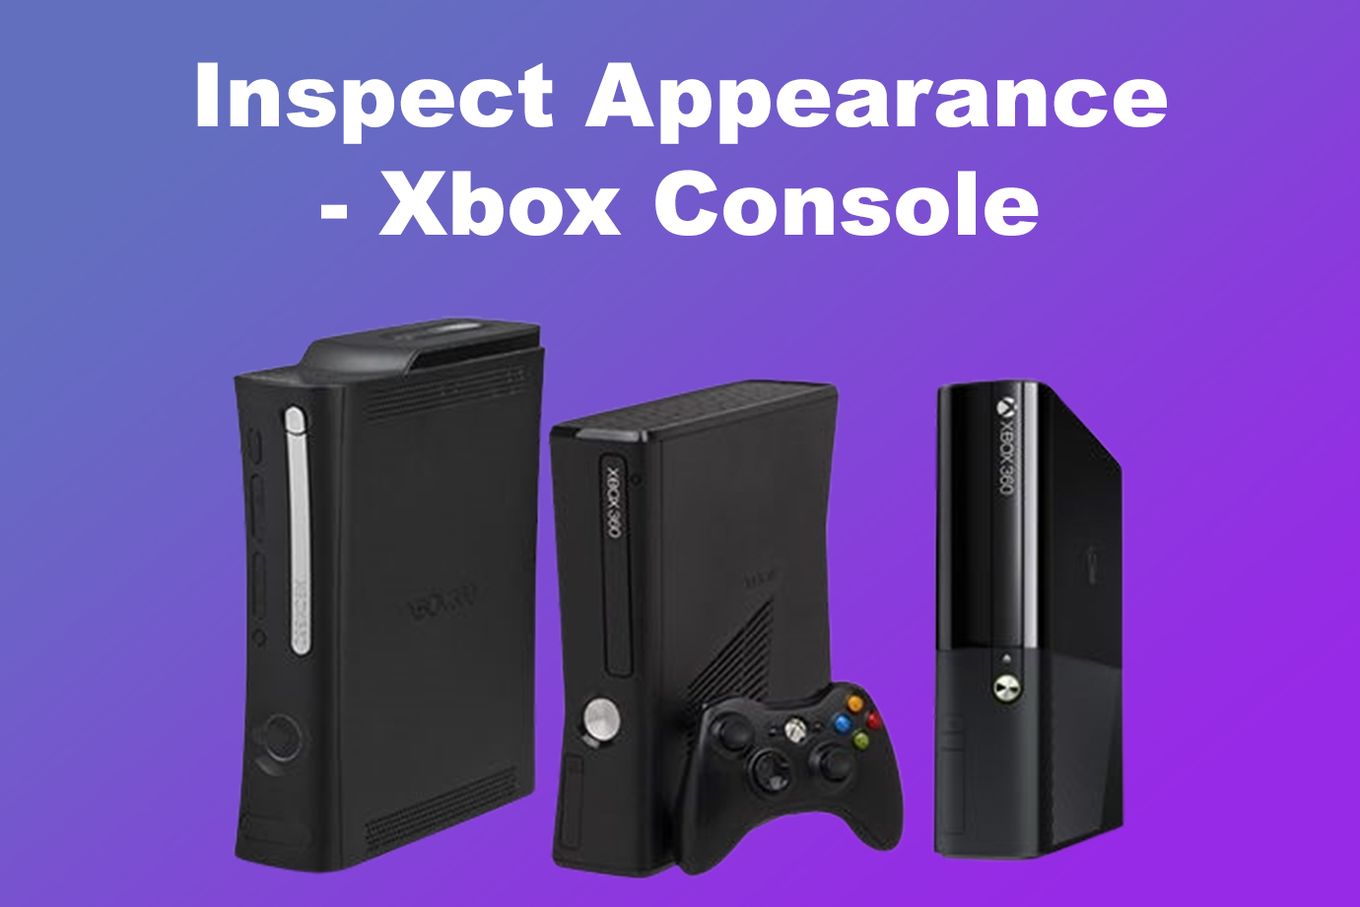 Inspect Appearance - Xbox Console